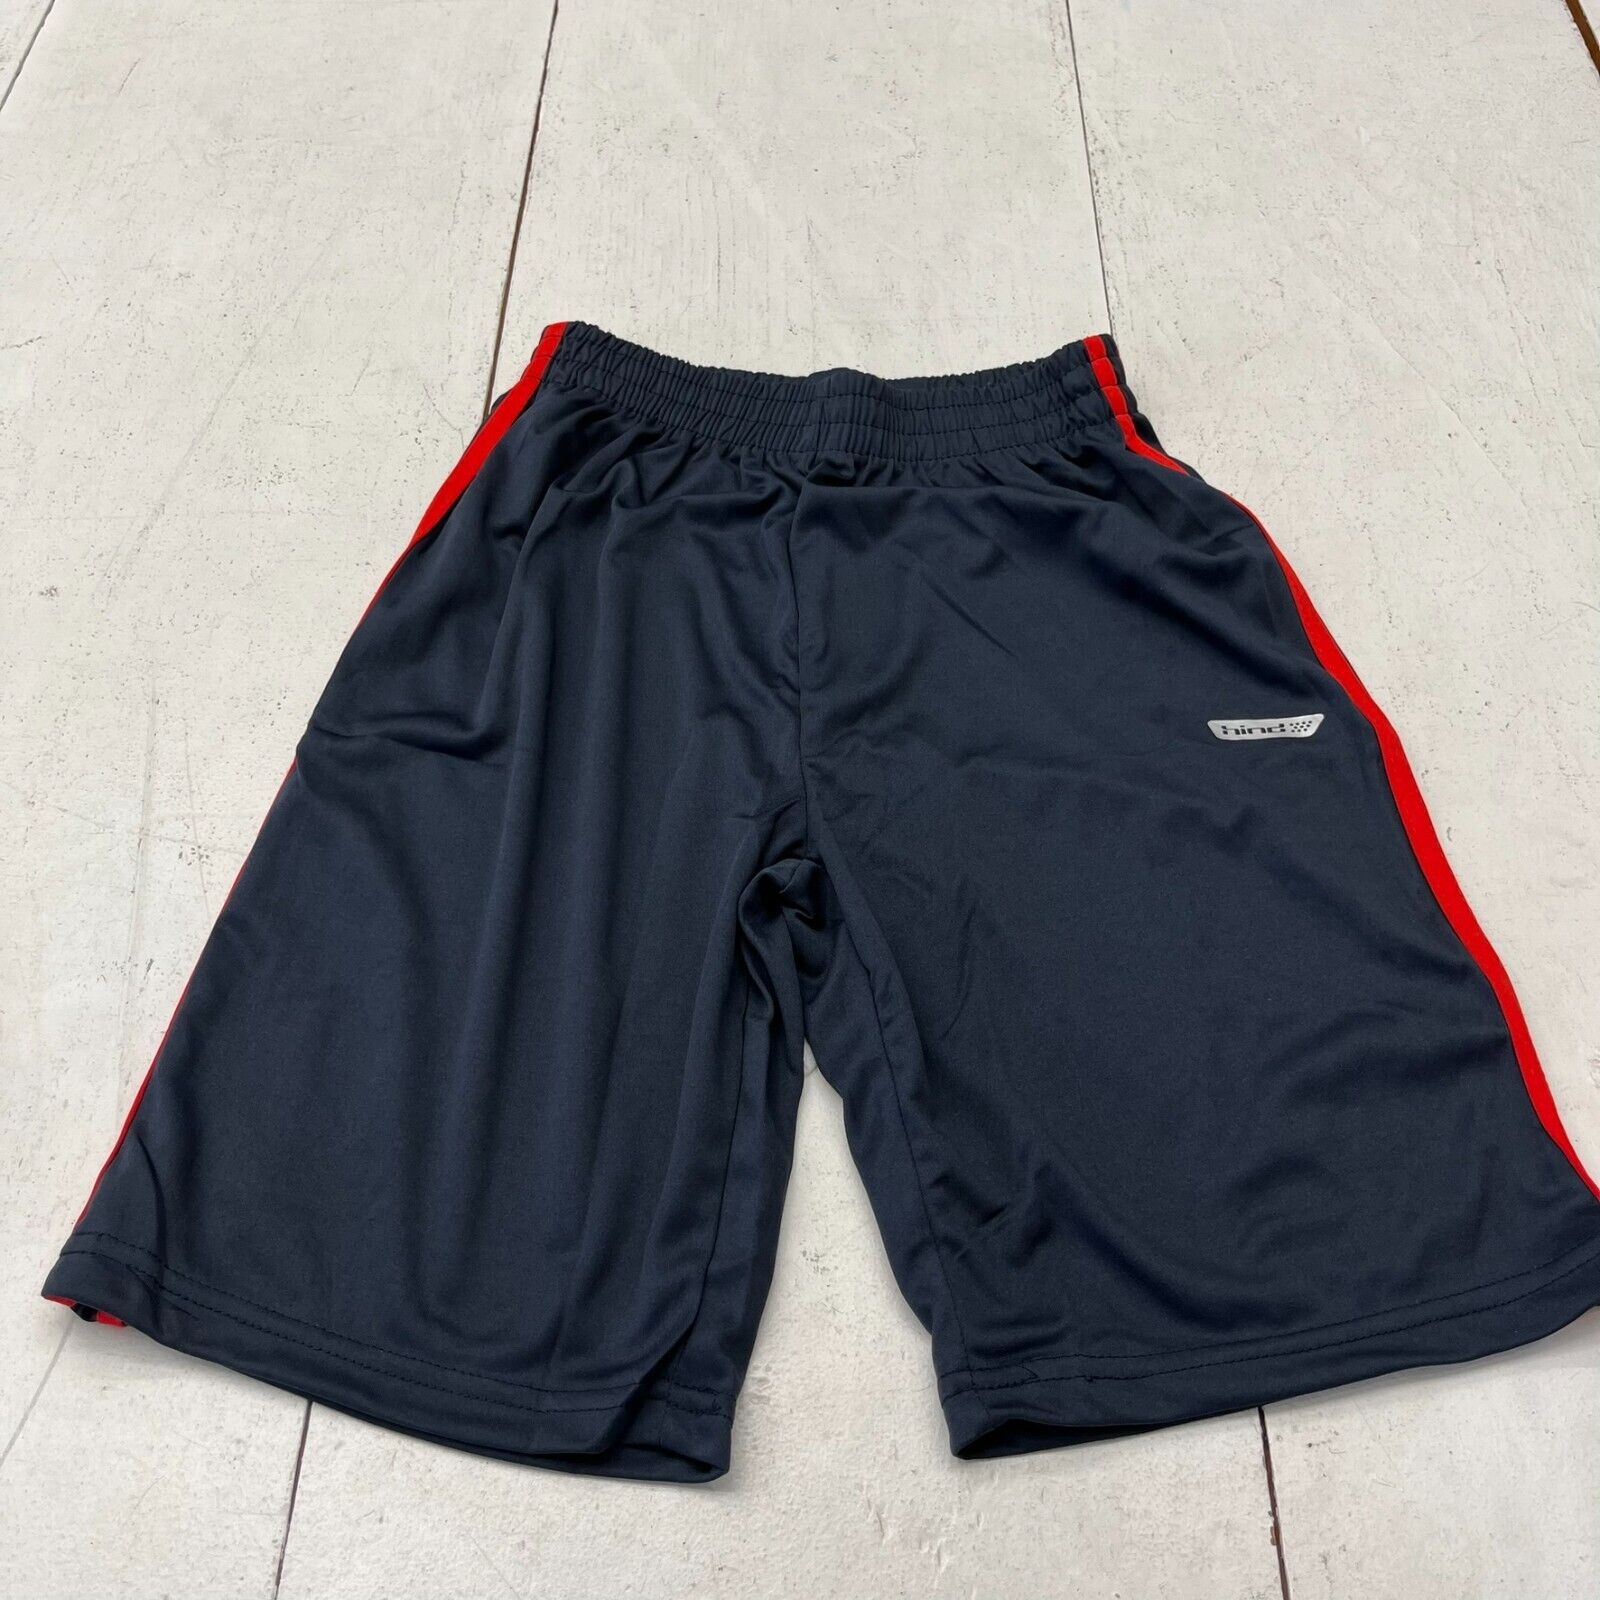 Hind Black & Red Trim Athletic Shorts Boys Size Large (12)